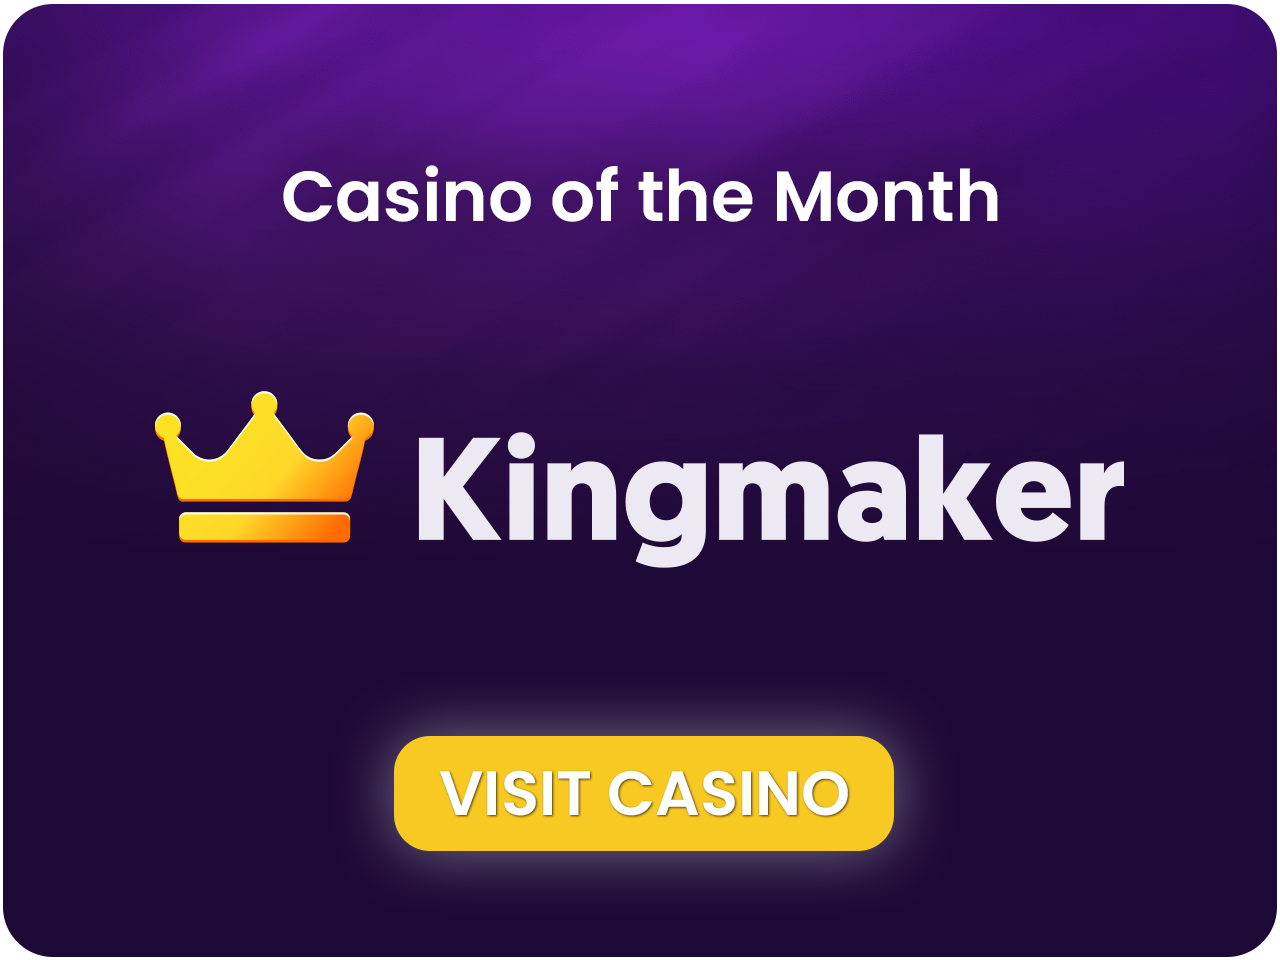 Kingmaker Casino of the Month